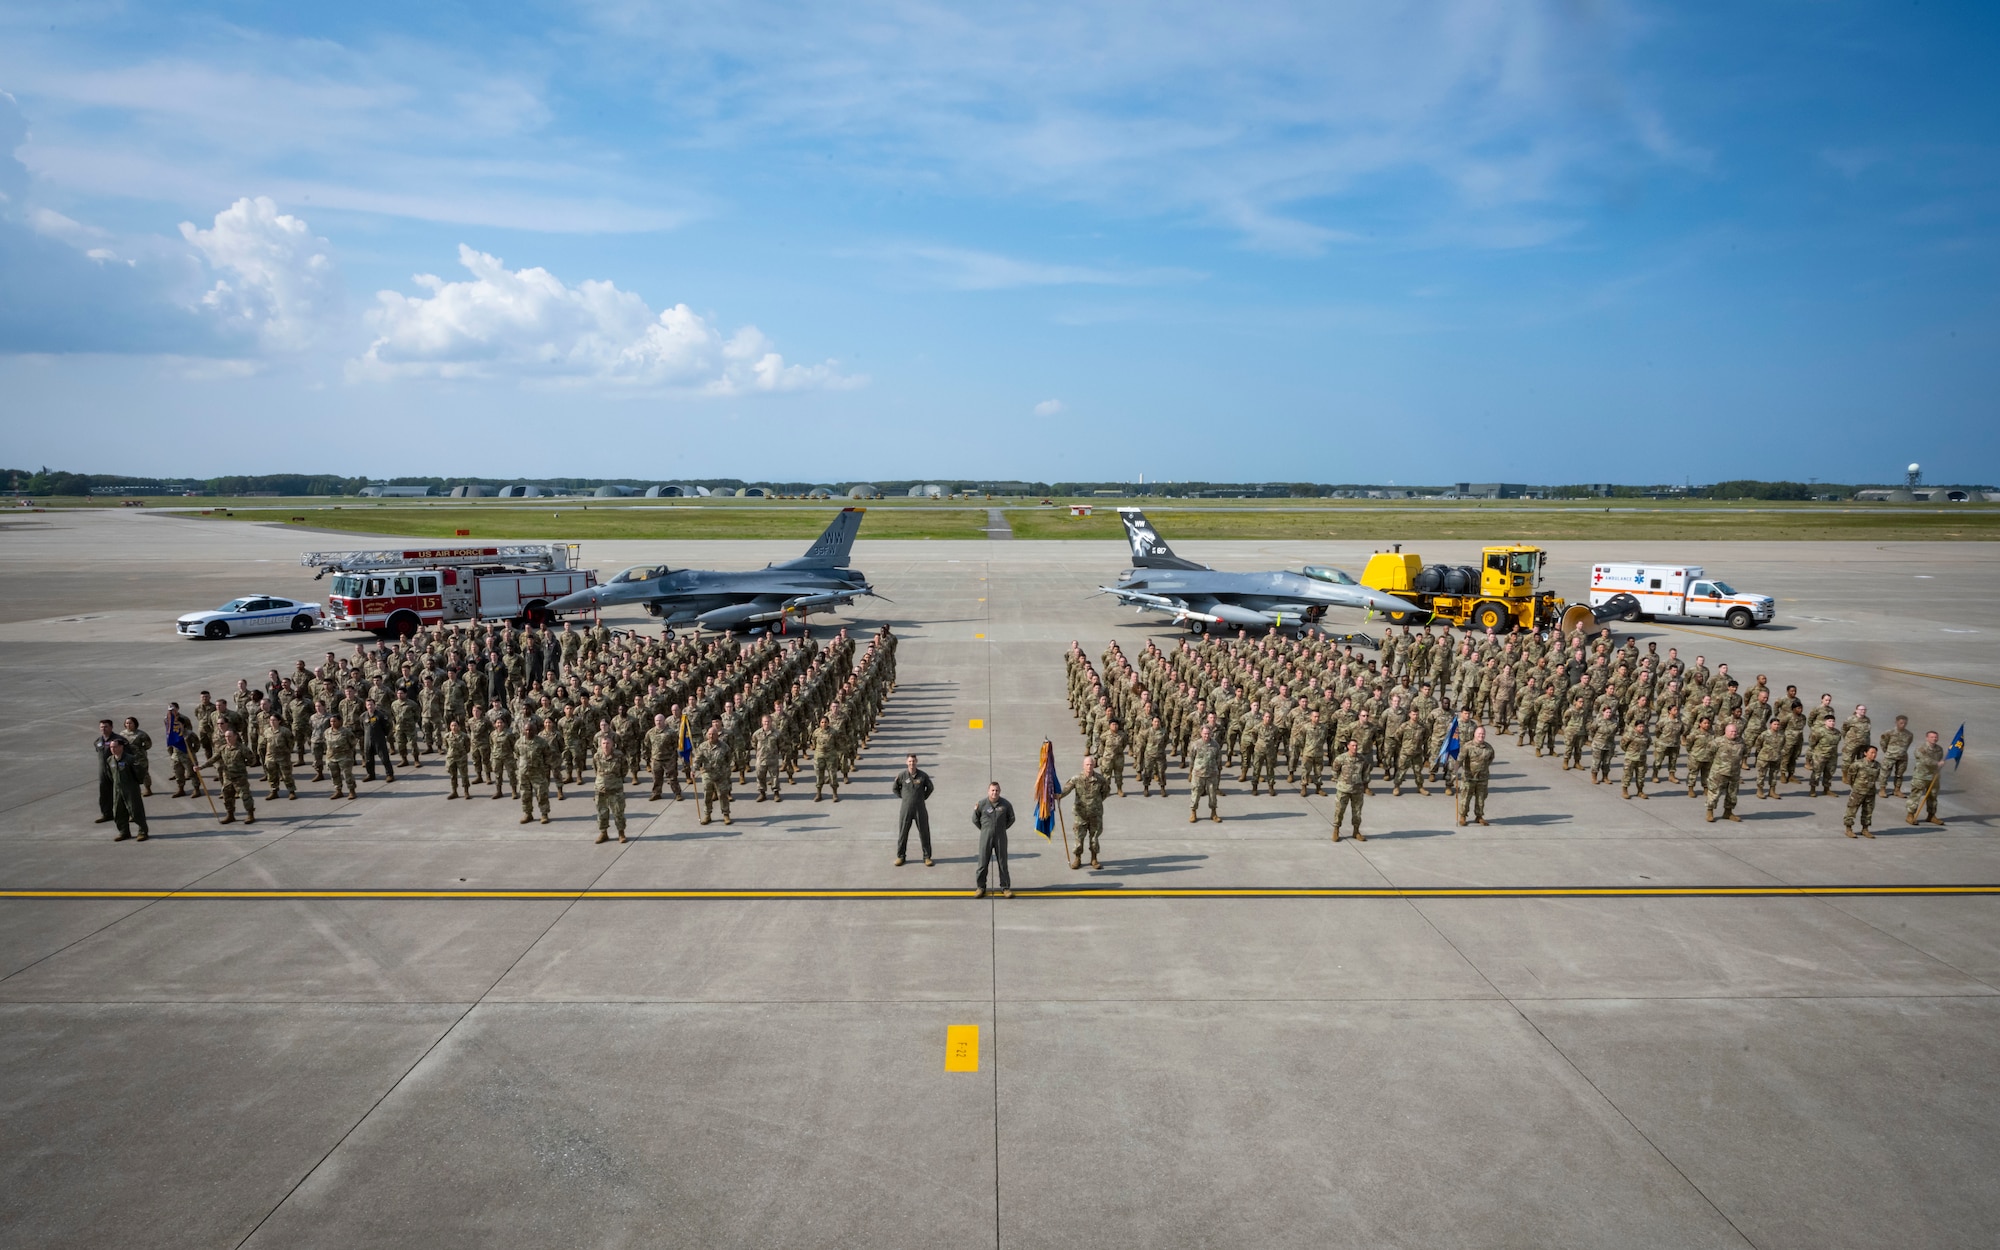 Group of military members in uniform pose in front of military vehicles and aircraft for a photo.